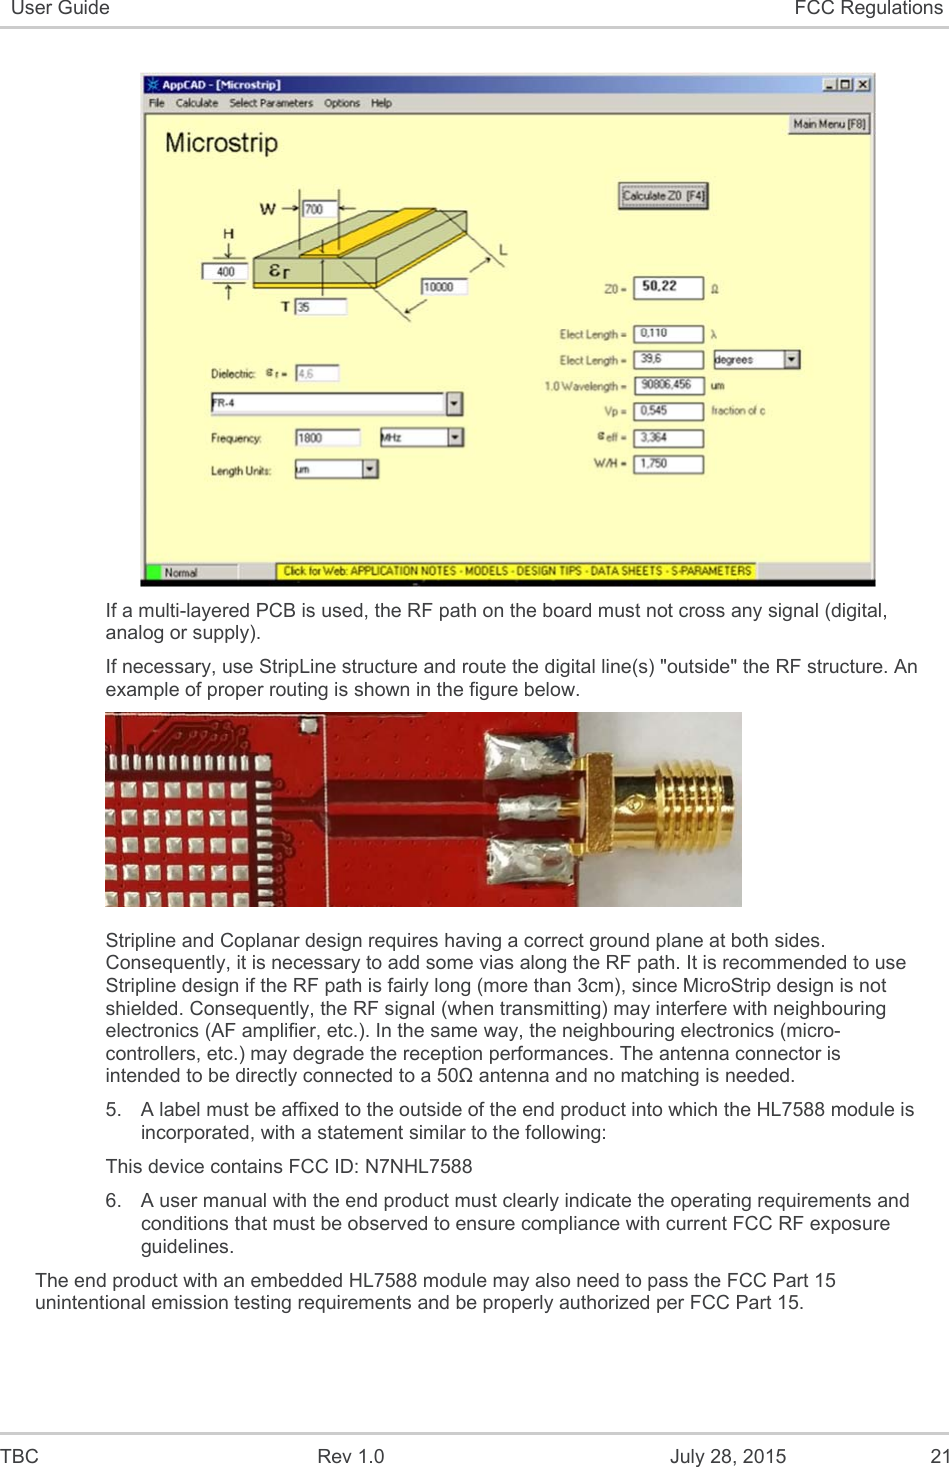  TBC  Rev 1.0  July 28, 2015  21 User Guide  FCC Regulations   If a multi-layered PCB is used, the RF path on the board must not cross any signal (digital, analog or supply).  If necessary, use StripLine structure and route the digital line(s) &quot;outside&quot; the RF structure. An example of proper routing is shown in the figure below.   Stripline and Coplanar design requires having a correct ground plane at both sides. Consequently, it is necessary to add some vias along the RF path. It is recommended to use Stripline design if the RF path is fairly long (more than 3cm), since MicroStrip design is not shielded. Consequently, the RF signal (when transmitting) may interfere with neighbouring electronics (AF amplifier, etc.). In the same way, the neighbouring electronics (micro-controllers, etc.) may degrade the reception performances. The antenna connector is intended to be directly connected to a 50Ω antenna and no matching is needed. 5.  A label must be affixed to the outside of the end product into which the HL7588 module is incorporated, with a statement similar to the following: This device contains FCC ID: N7NHL7588  6.  A user manual with the end product must clearly indicate the operating requirements and conditions that must be observed to ensure compliance with current FCC RF exposure guidelines. The end product with an embedded HL7588 module may also need to pass the FCC Part 15 unintentional emission testing requirements and be properly authorized per FCC Part 15.   